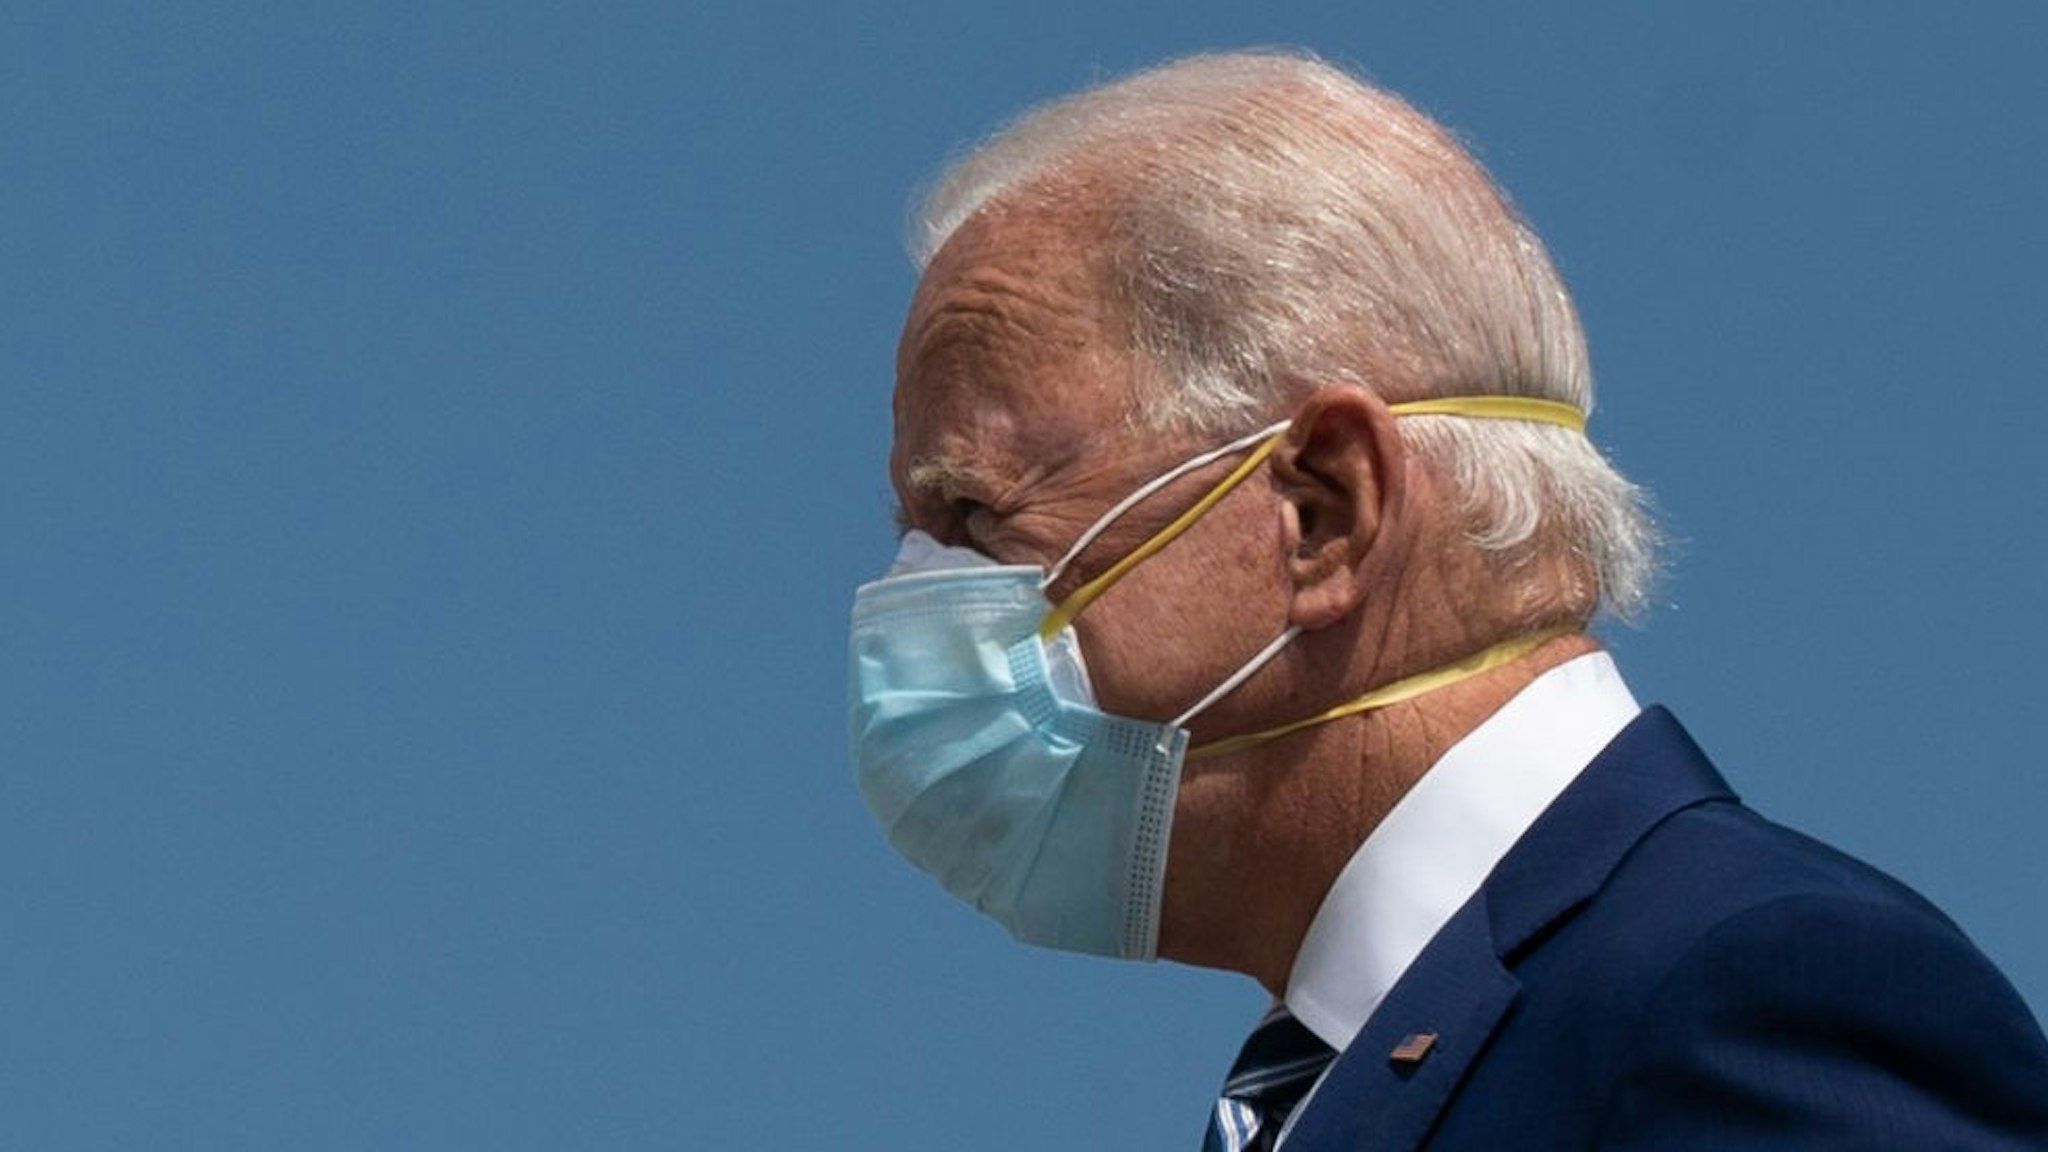 Democratic Presidential Candidate Joe Biden wears two masks as he arrives in Fort Lauderdale, Florida on October 13, 2020. - Joe Biden headed for Florida on Tuesday to court elderly Americans who helped elect Donald Trump four years ago but appear to be swinging to the Democratic candidate for the White House this time around amid the coronavirus pandemic. Biden, at 77 the oldest Democratic nominee ever, is to "deliver his vision for older Americans" at an event in the city of Pembroke Pines, north of Miami, his campaign said. (Photo by JIM WATSON / AFP) (Photo by